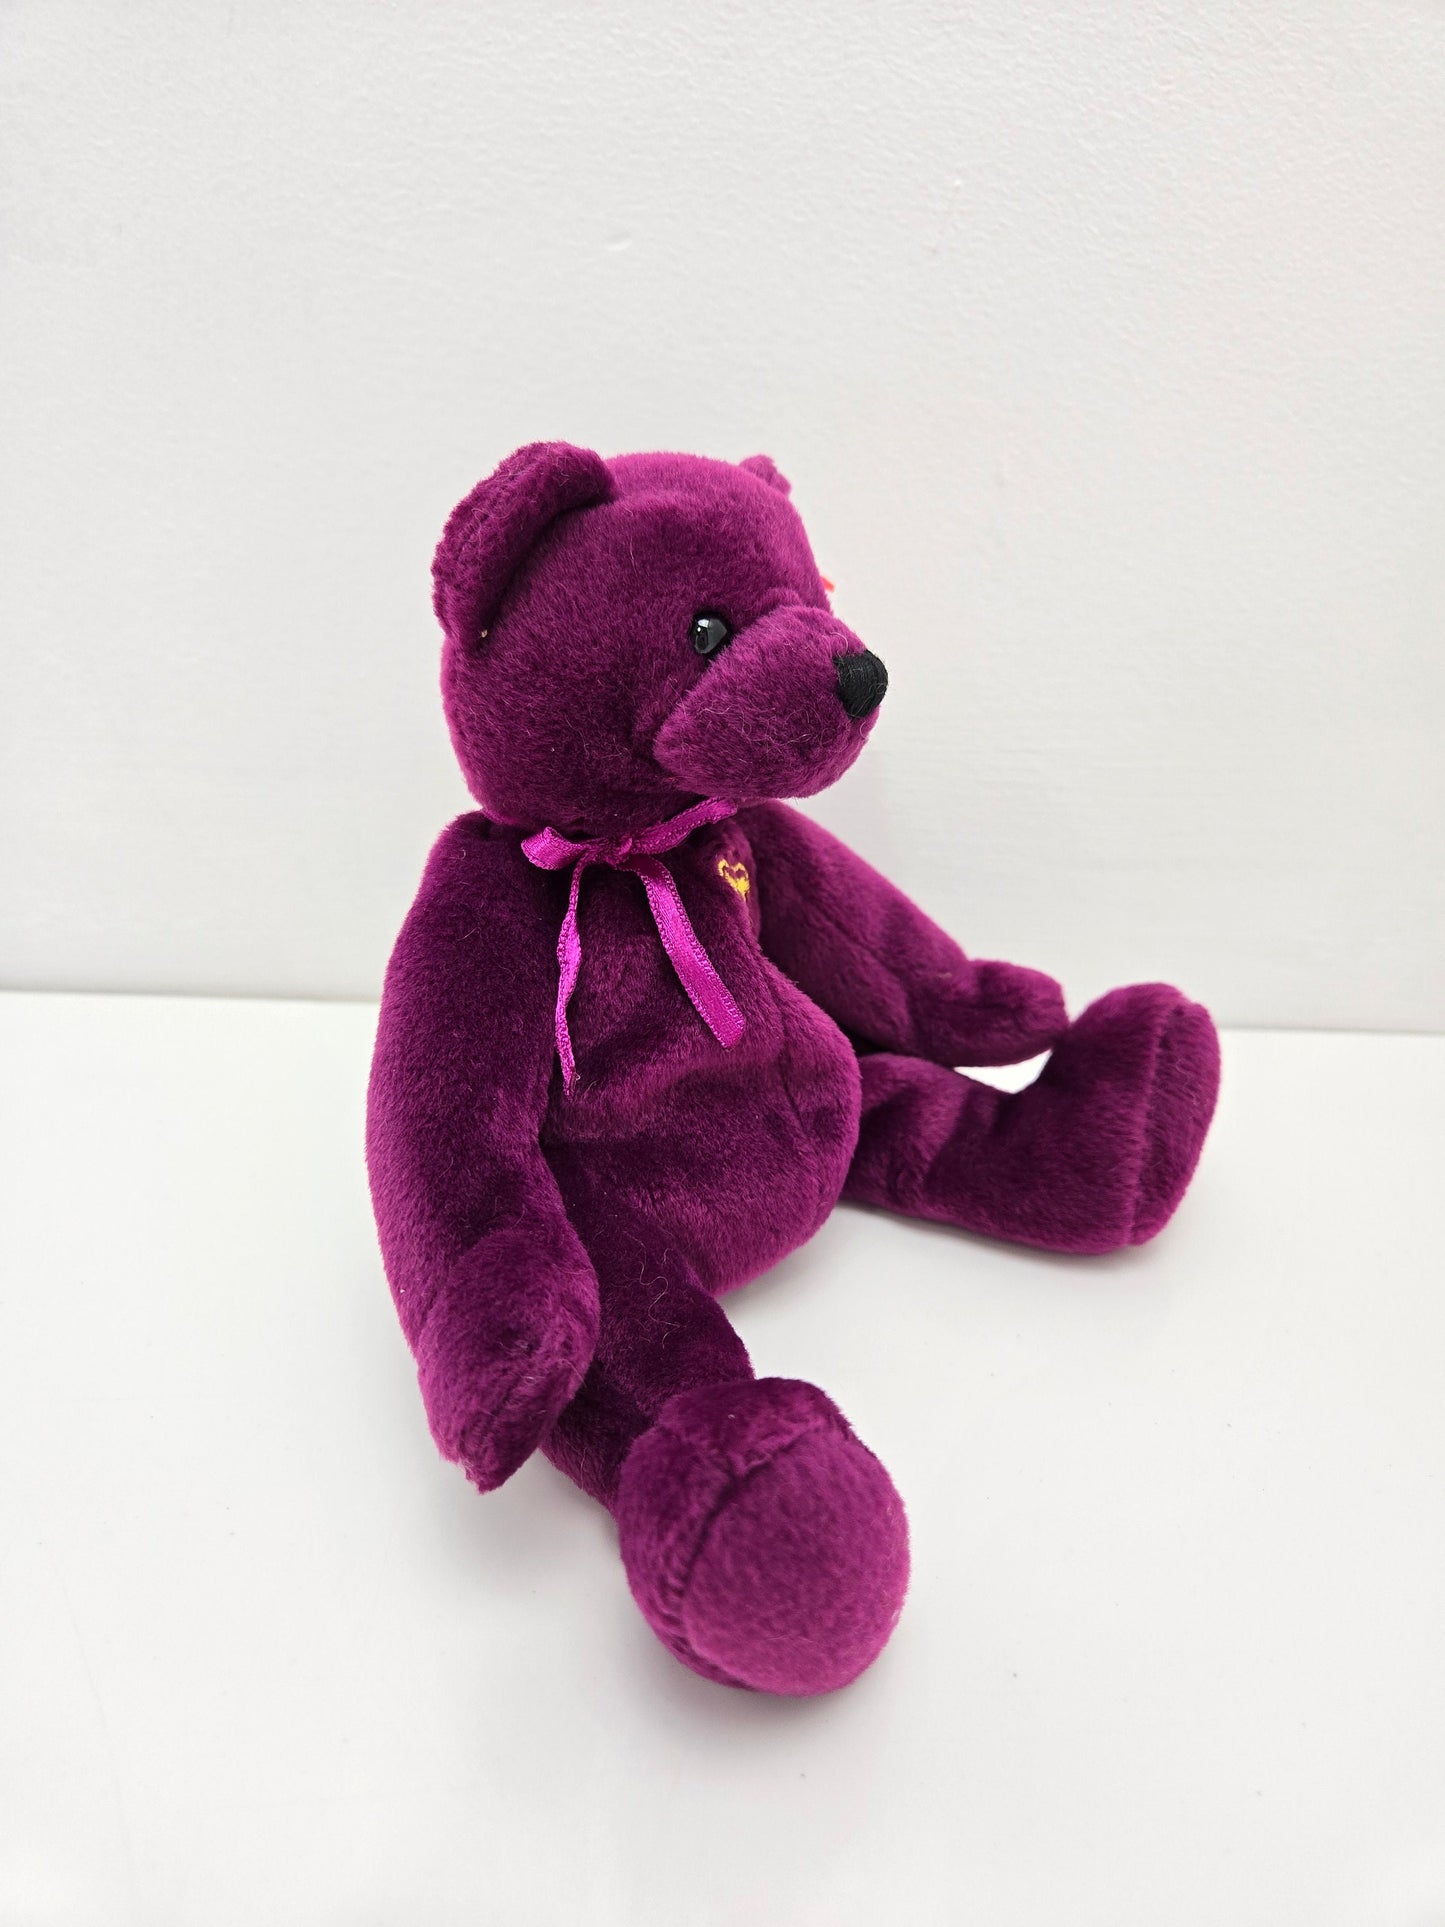 TY Beanie Baby “Majestic” the Bear - UK Exclusive *Rare* - Honouring the Queen’s 80th Birthday (7.5 inch)